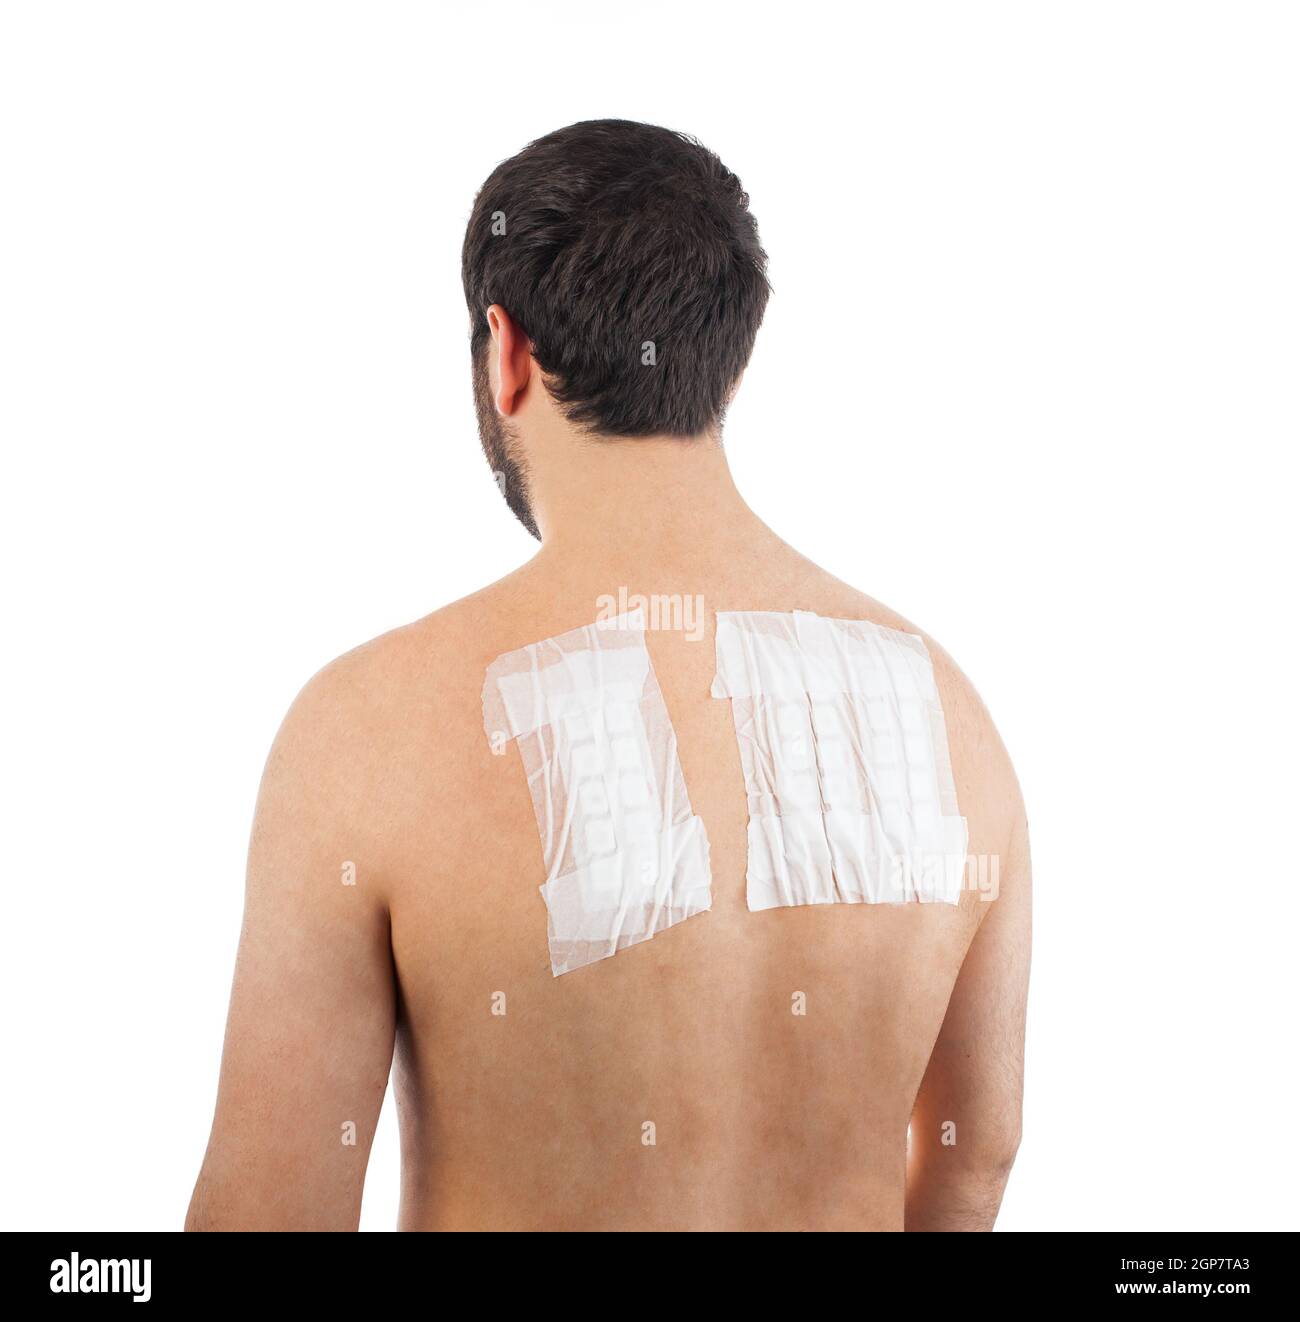 Skin Allergy Patch Test on Back of Male Patient On White Background Stock Photo